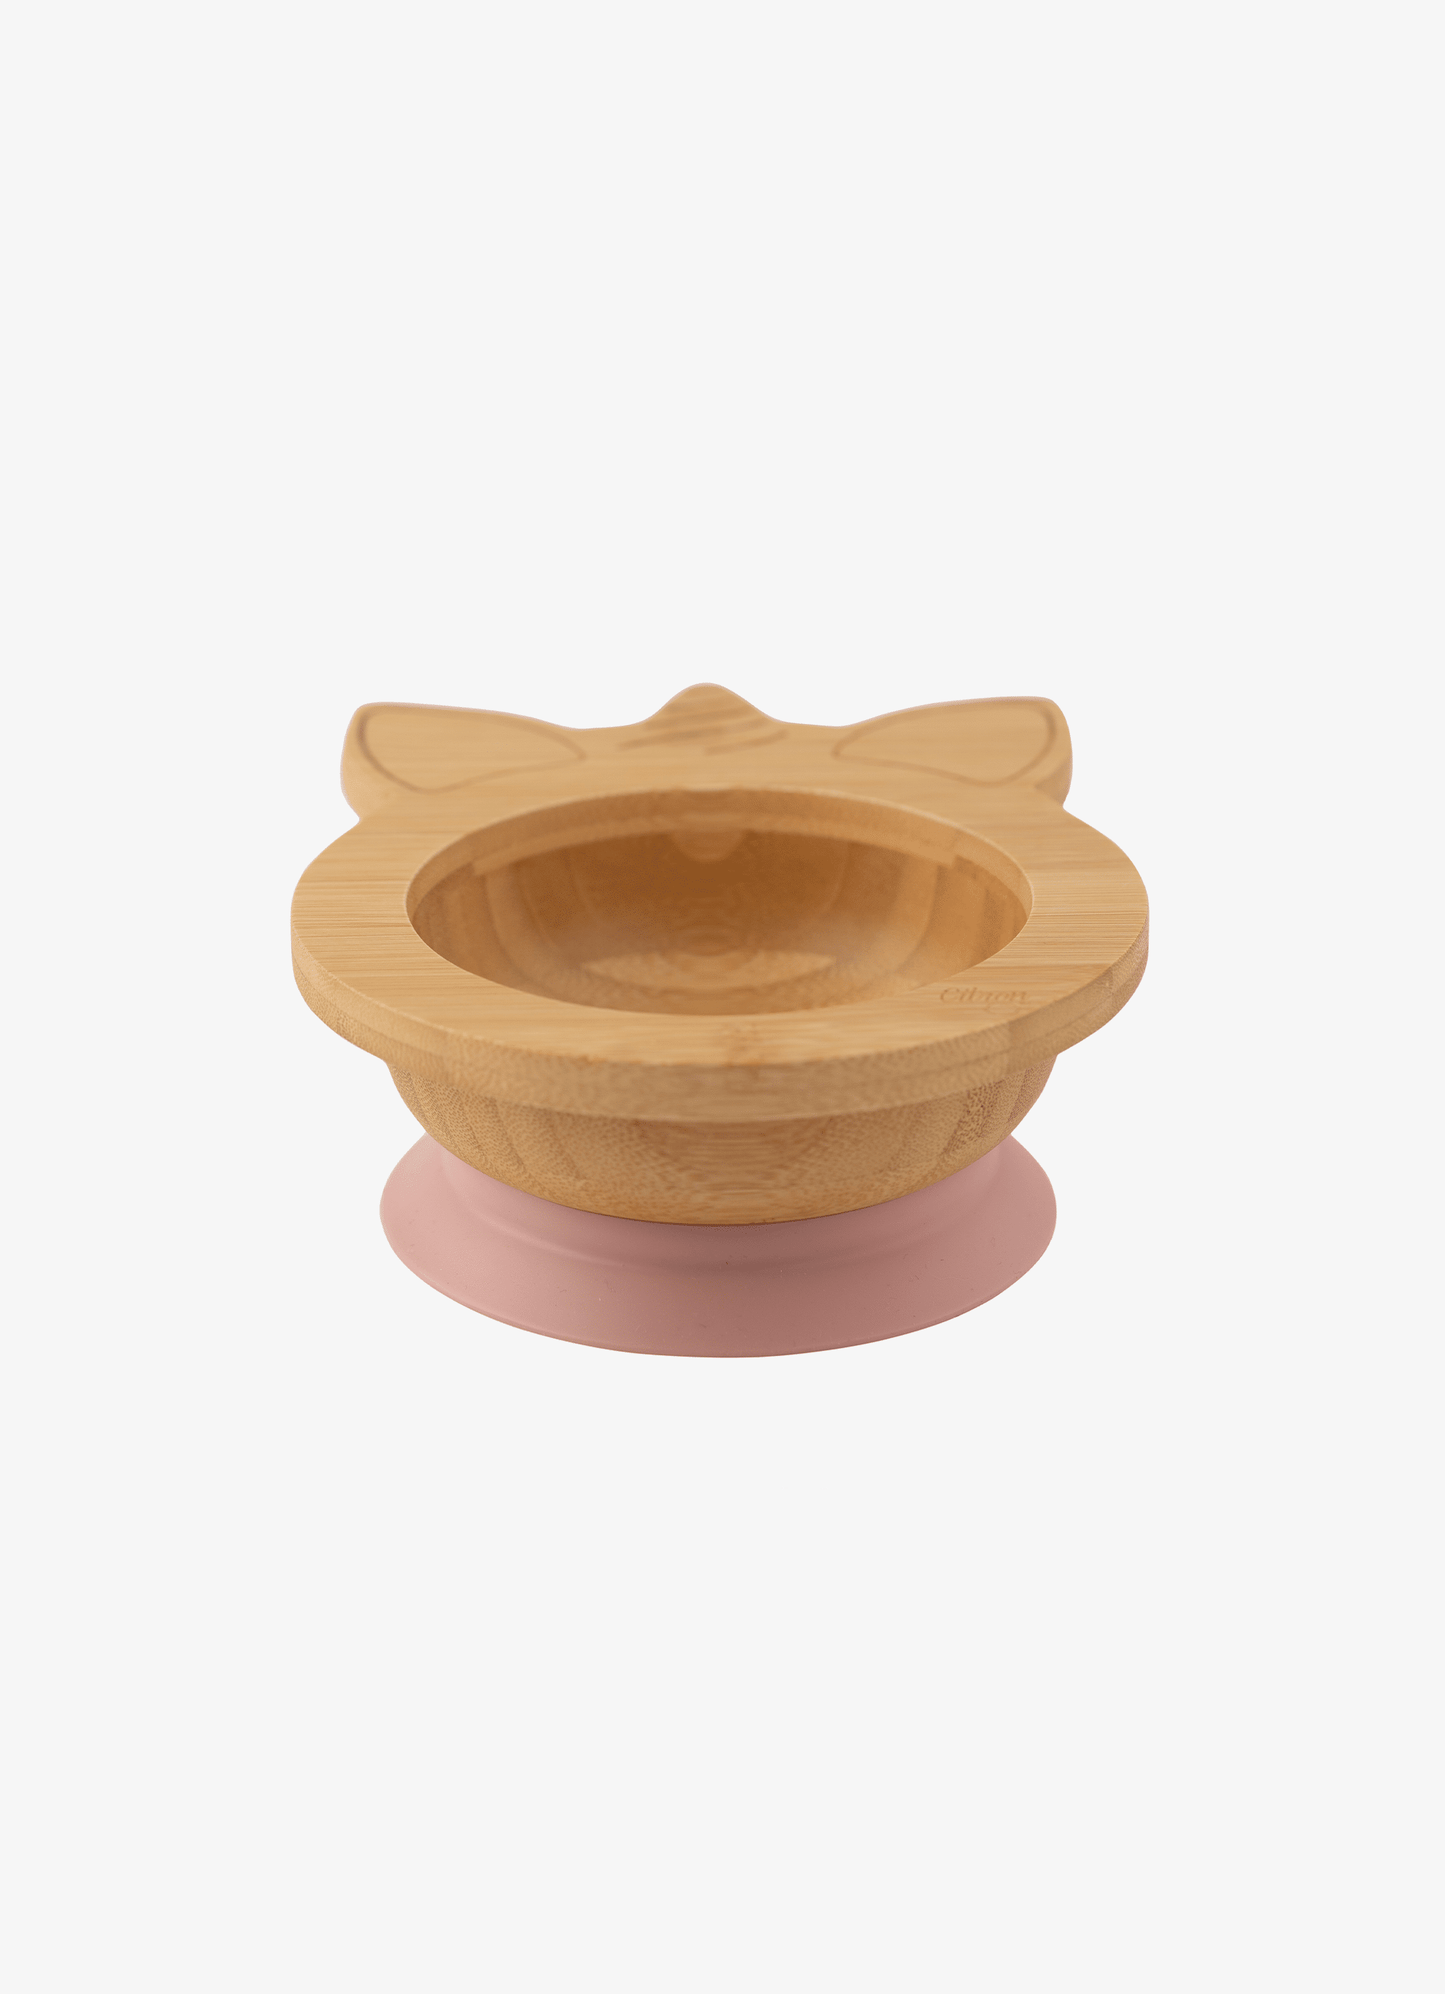 Bamboo Bowl & spoon - Unicorn Blush Pink + with suction